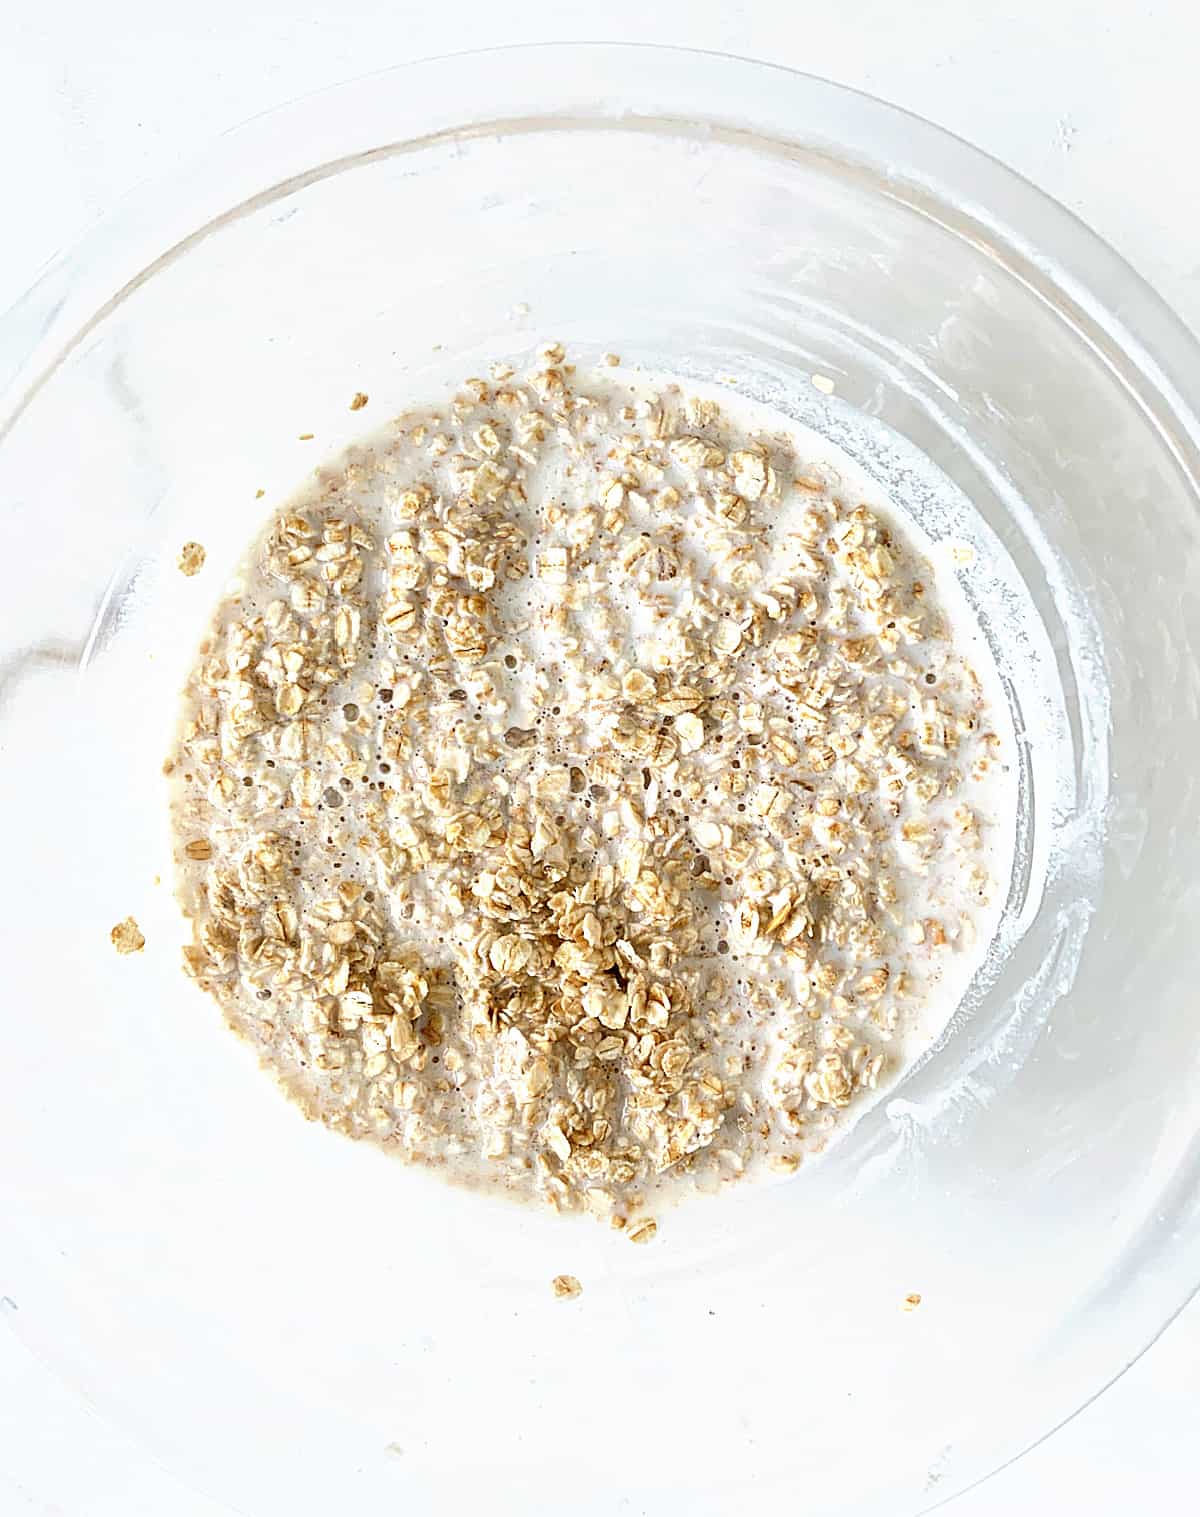 Oats and milk in a glass bowl on a white surface.